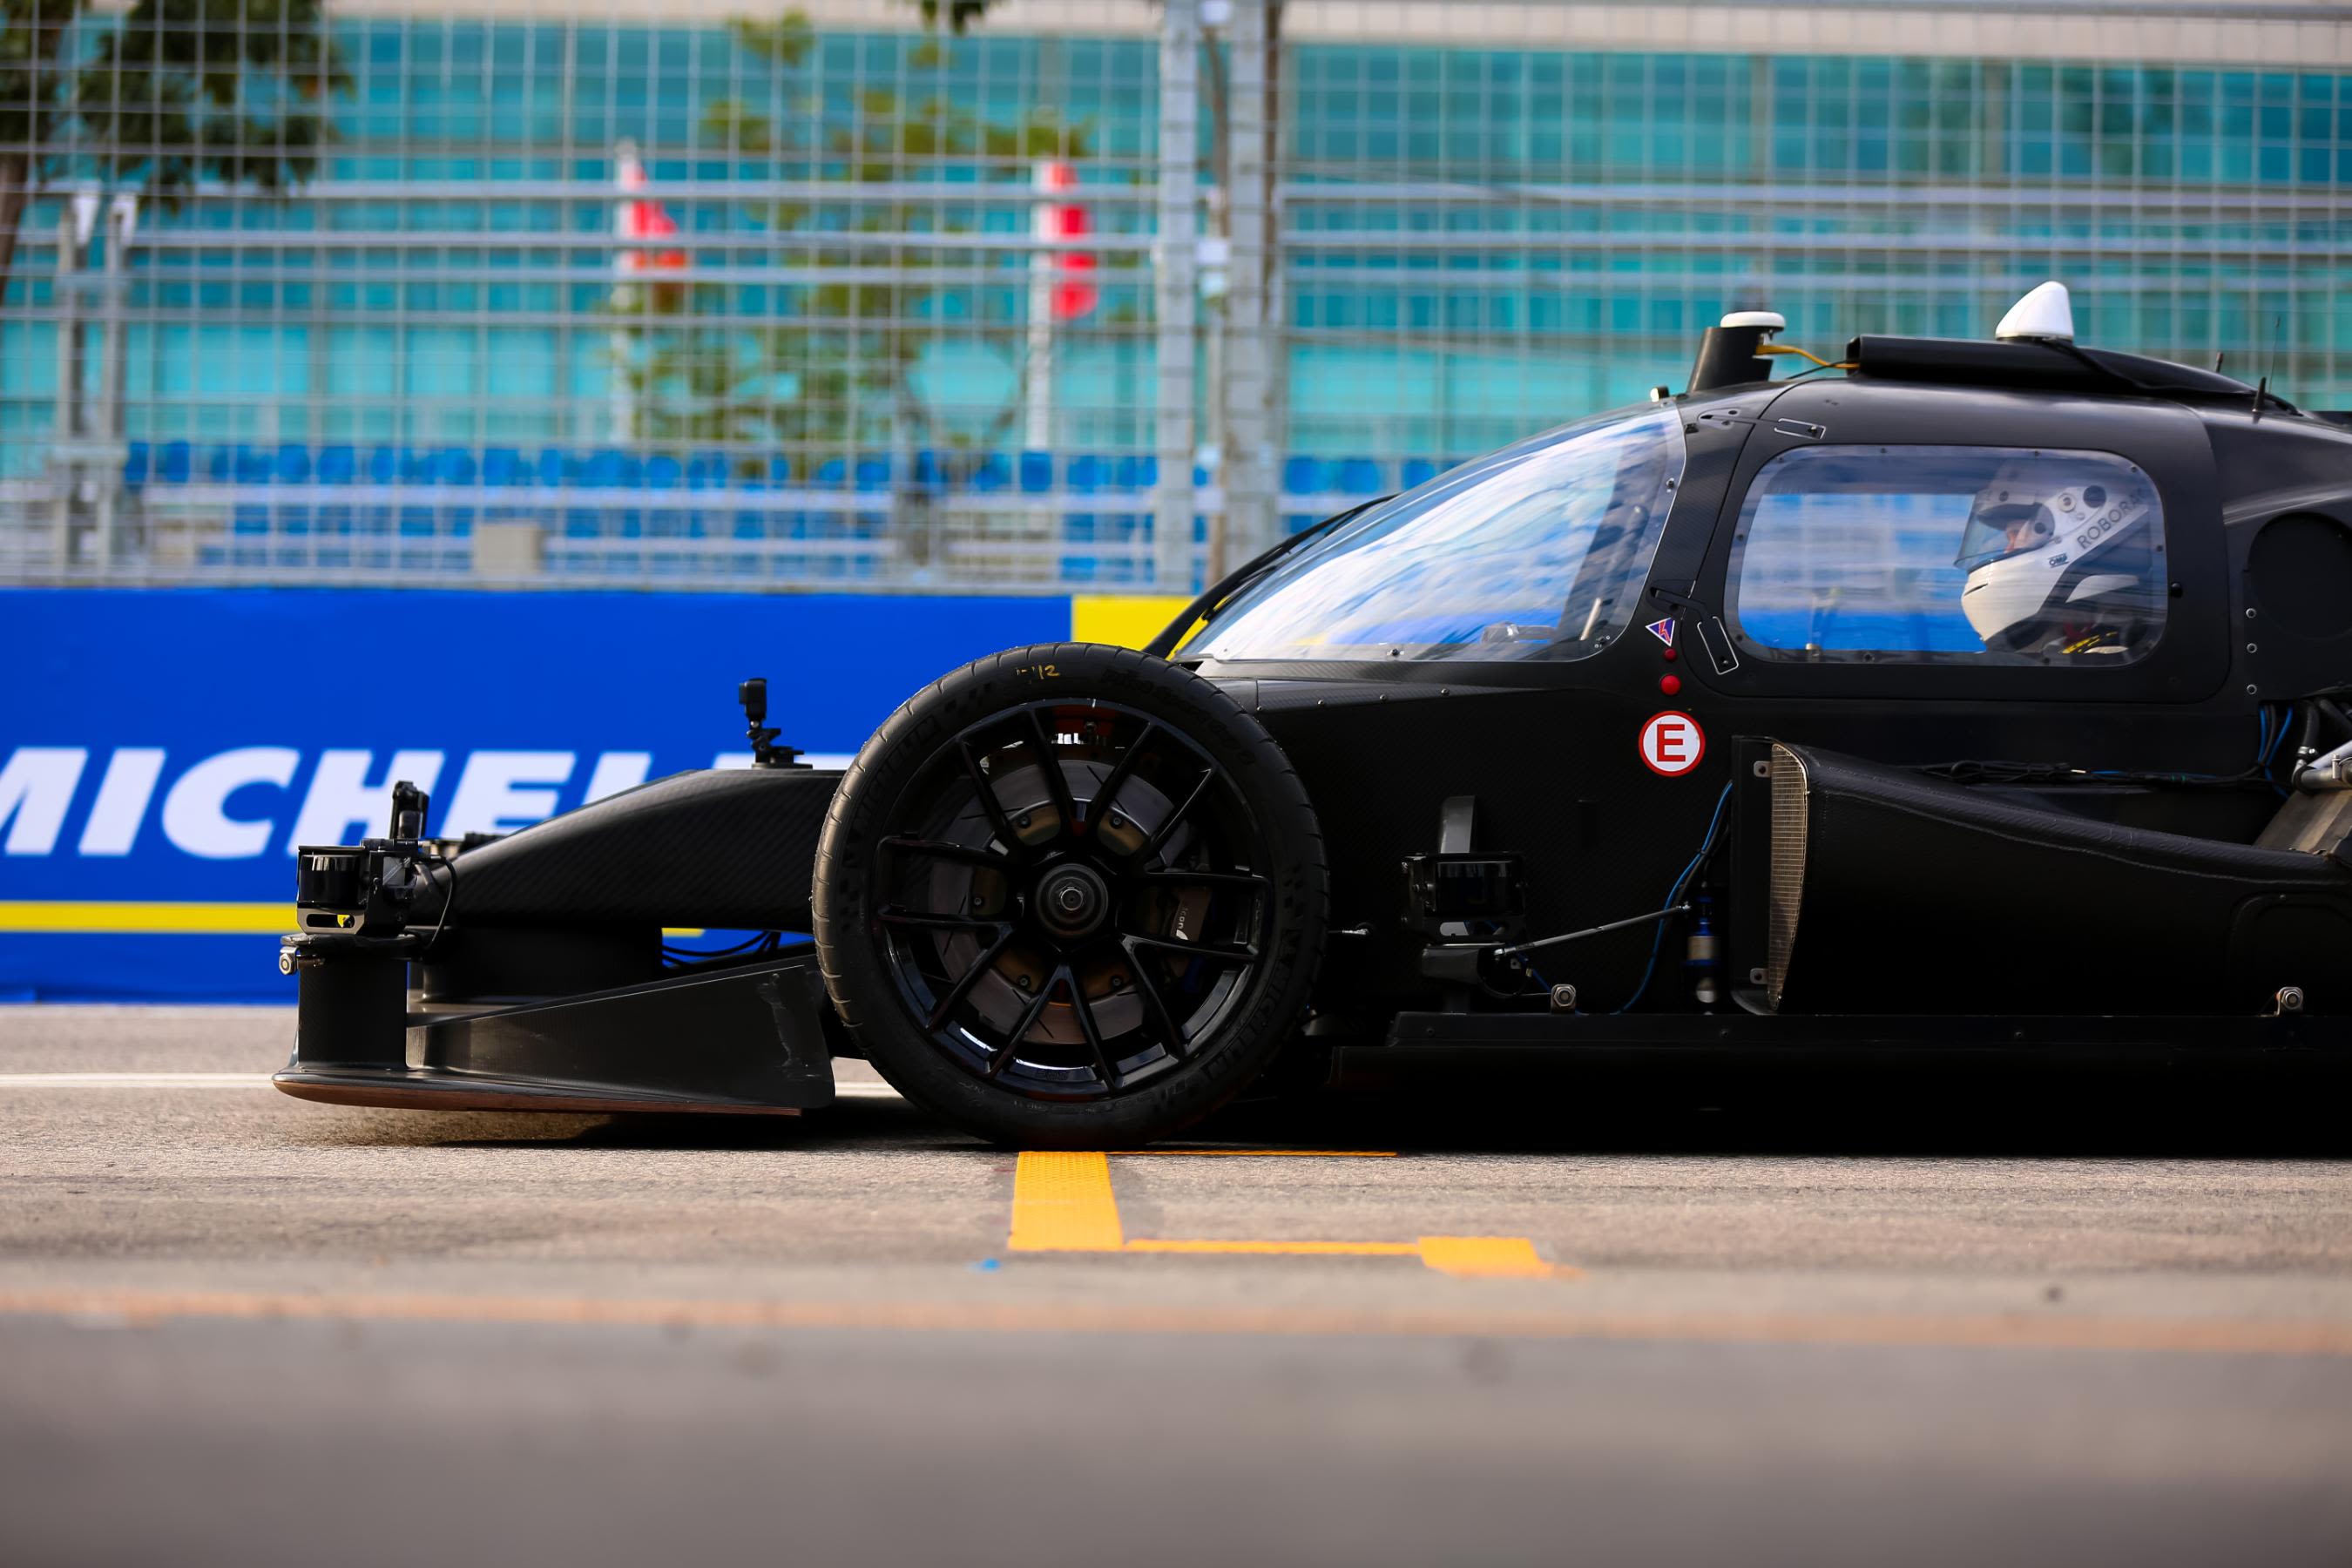 The Roborace's Self-Driving Race Car Is Every Kind of Absurd